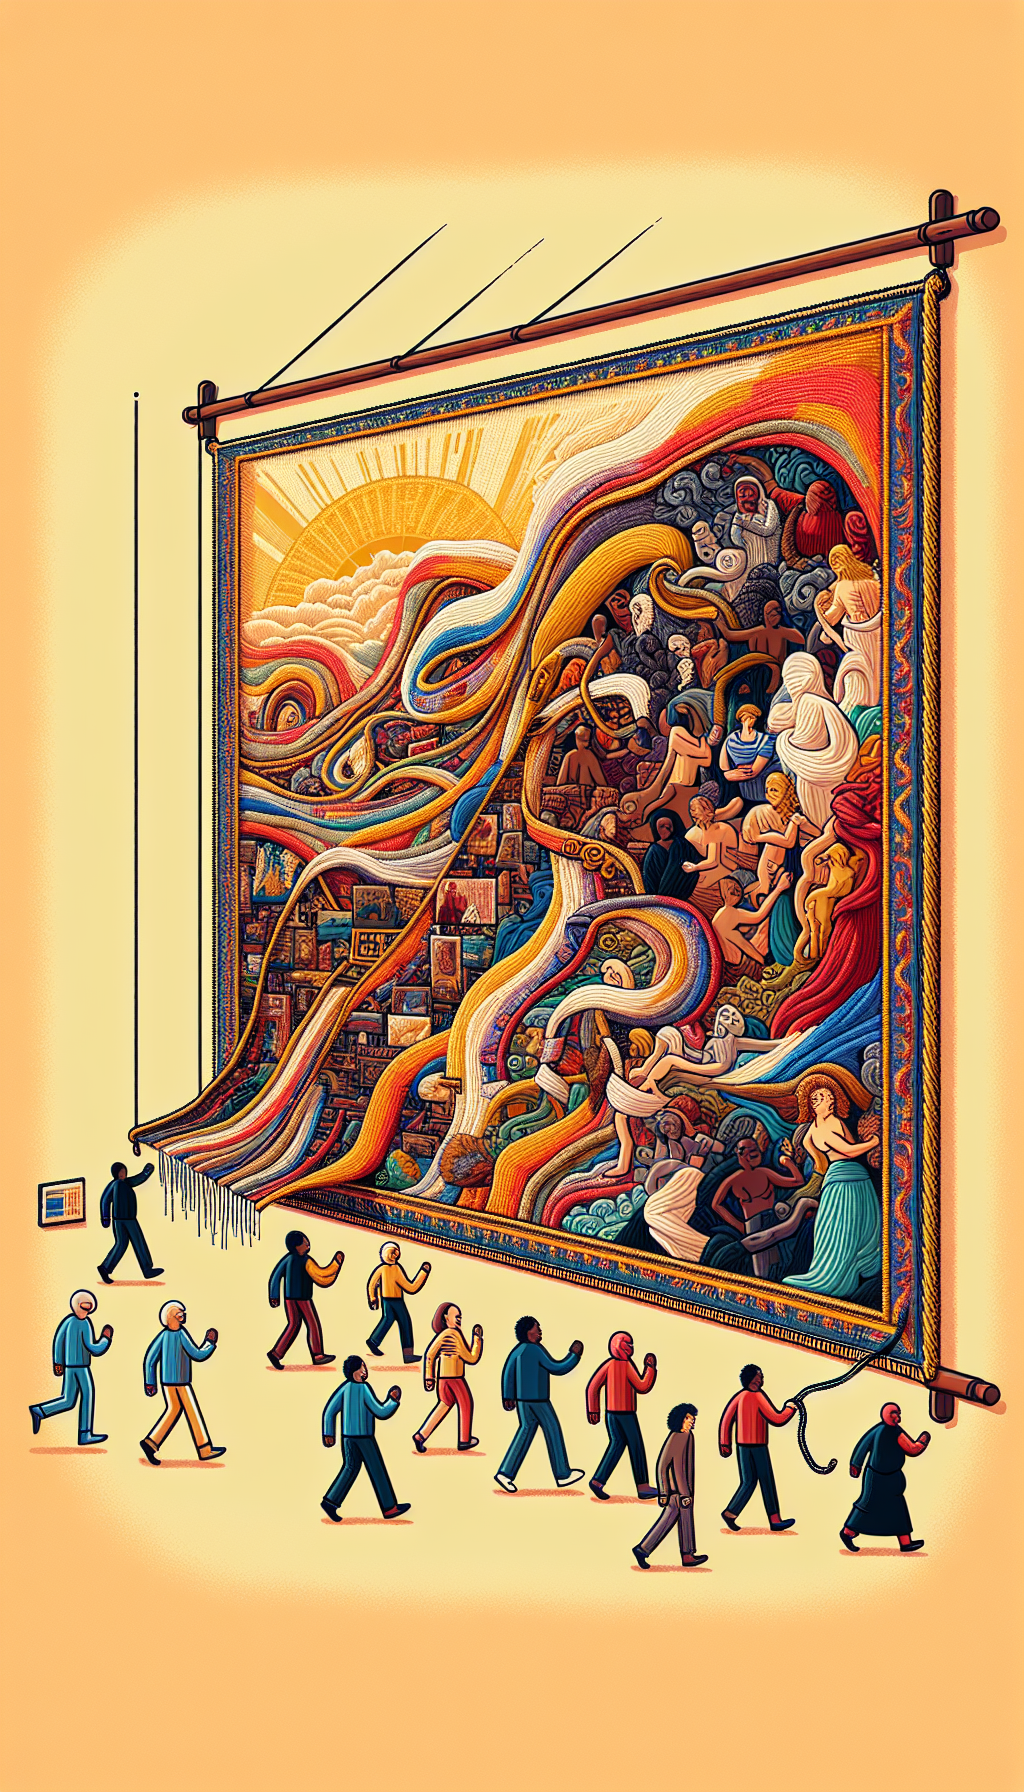 An illustration depicting a large, vibrant tapestry unfurling from a simple price tag, with scenes of various cultural and historical events woven into the fabric. The tapestry morphs into a diverse crowd of people who are emotionally engaged with the art, symbolizing art's deep societal impact, transcending its monetary value. The style transitions from realistic at the price tag to impressionistic within the vibrant scenes.